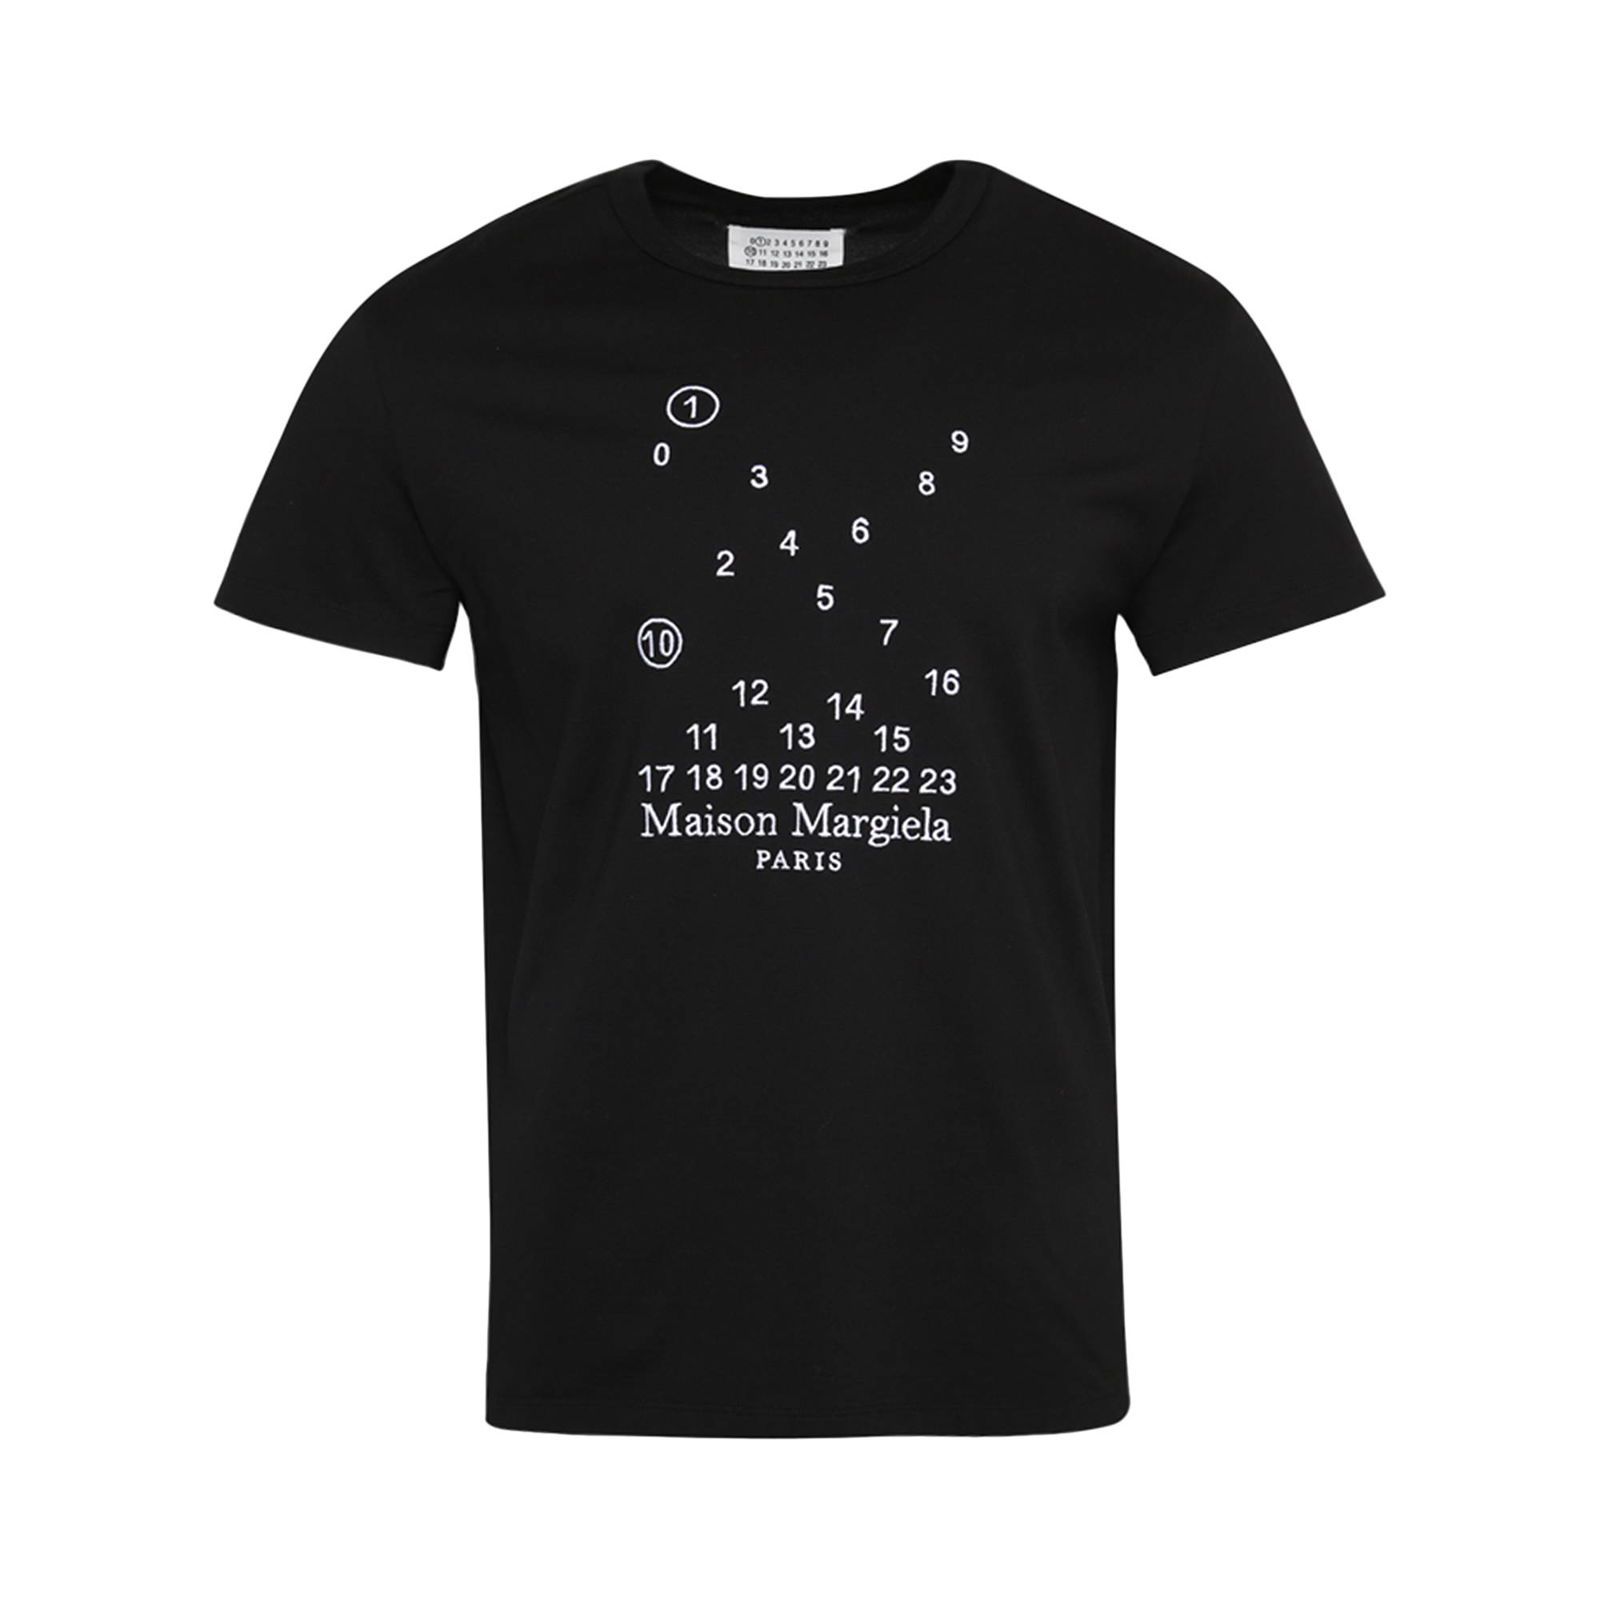 T-shirt Maison Margiela Embroidered Numbers Logo Tee S50GC0684 